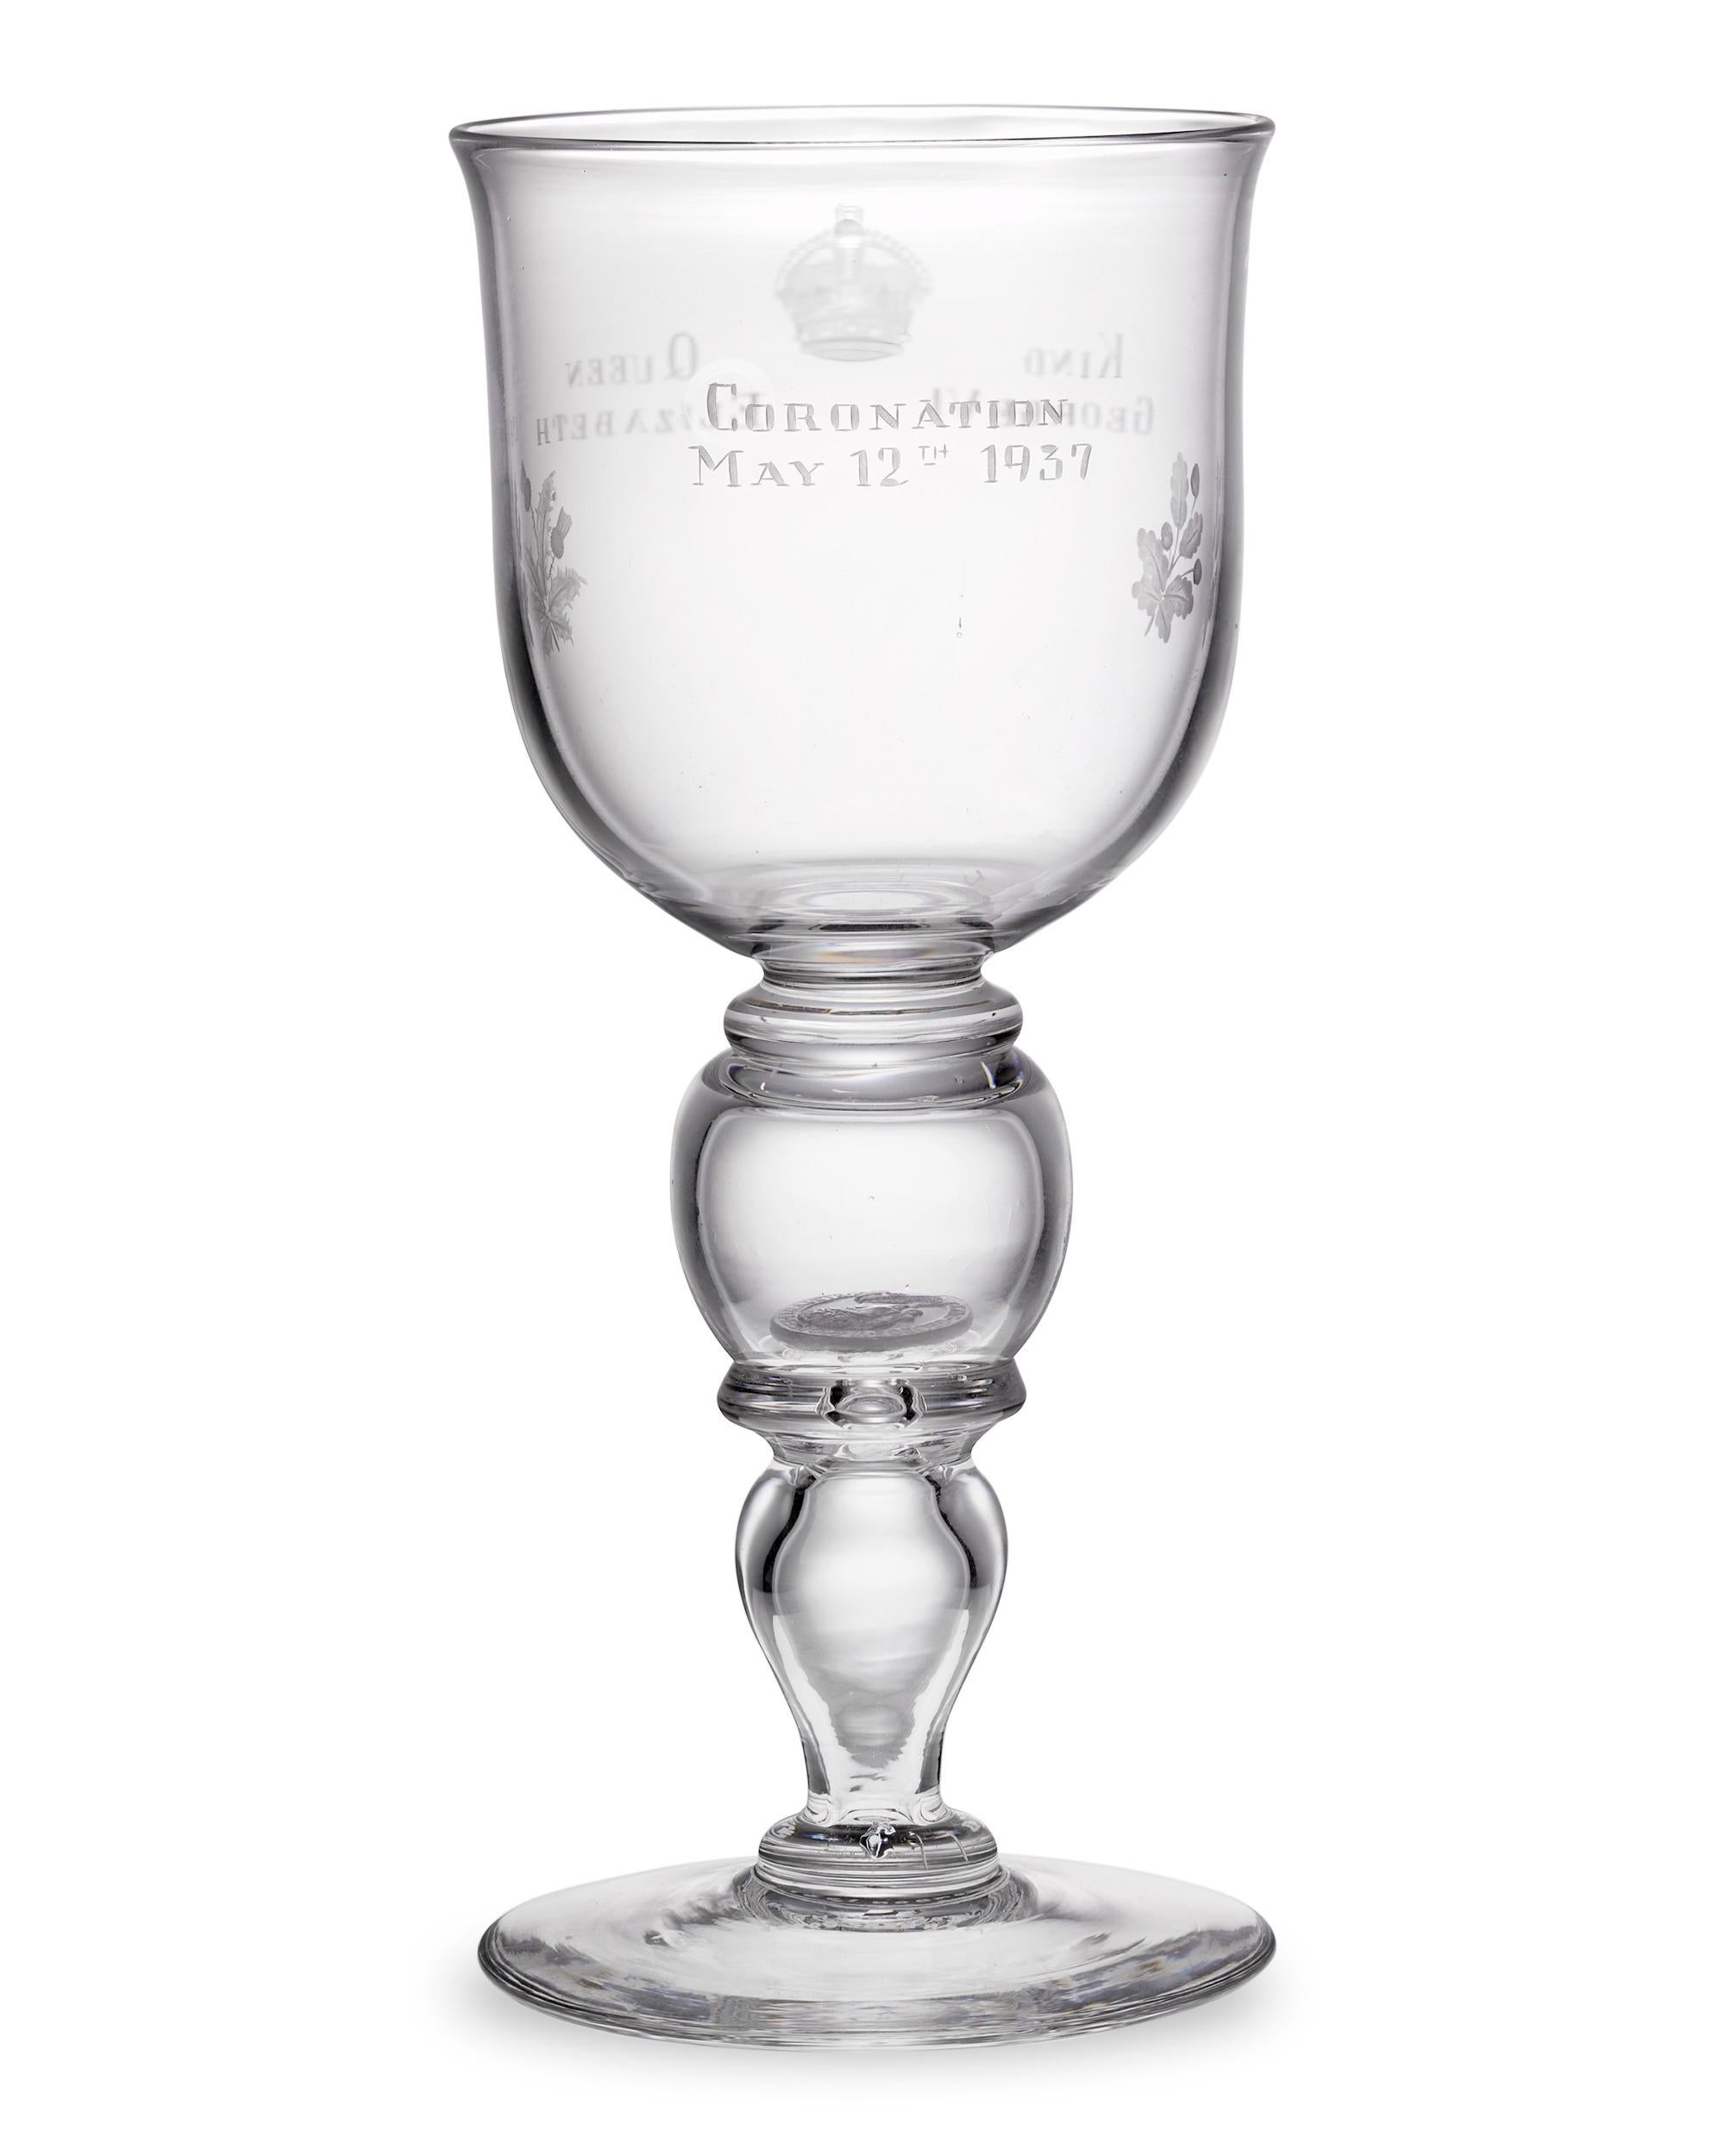 A special silver coin commemorating the coronation of King George VI and Queen Elizabeth is inset into the base of this limited edition glass goblet. Crafted by Thomas Goode & Co. of London, the goblet celebrates one of the most important events in